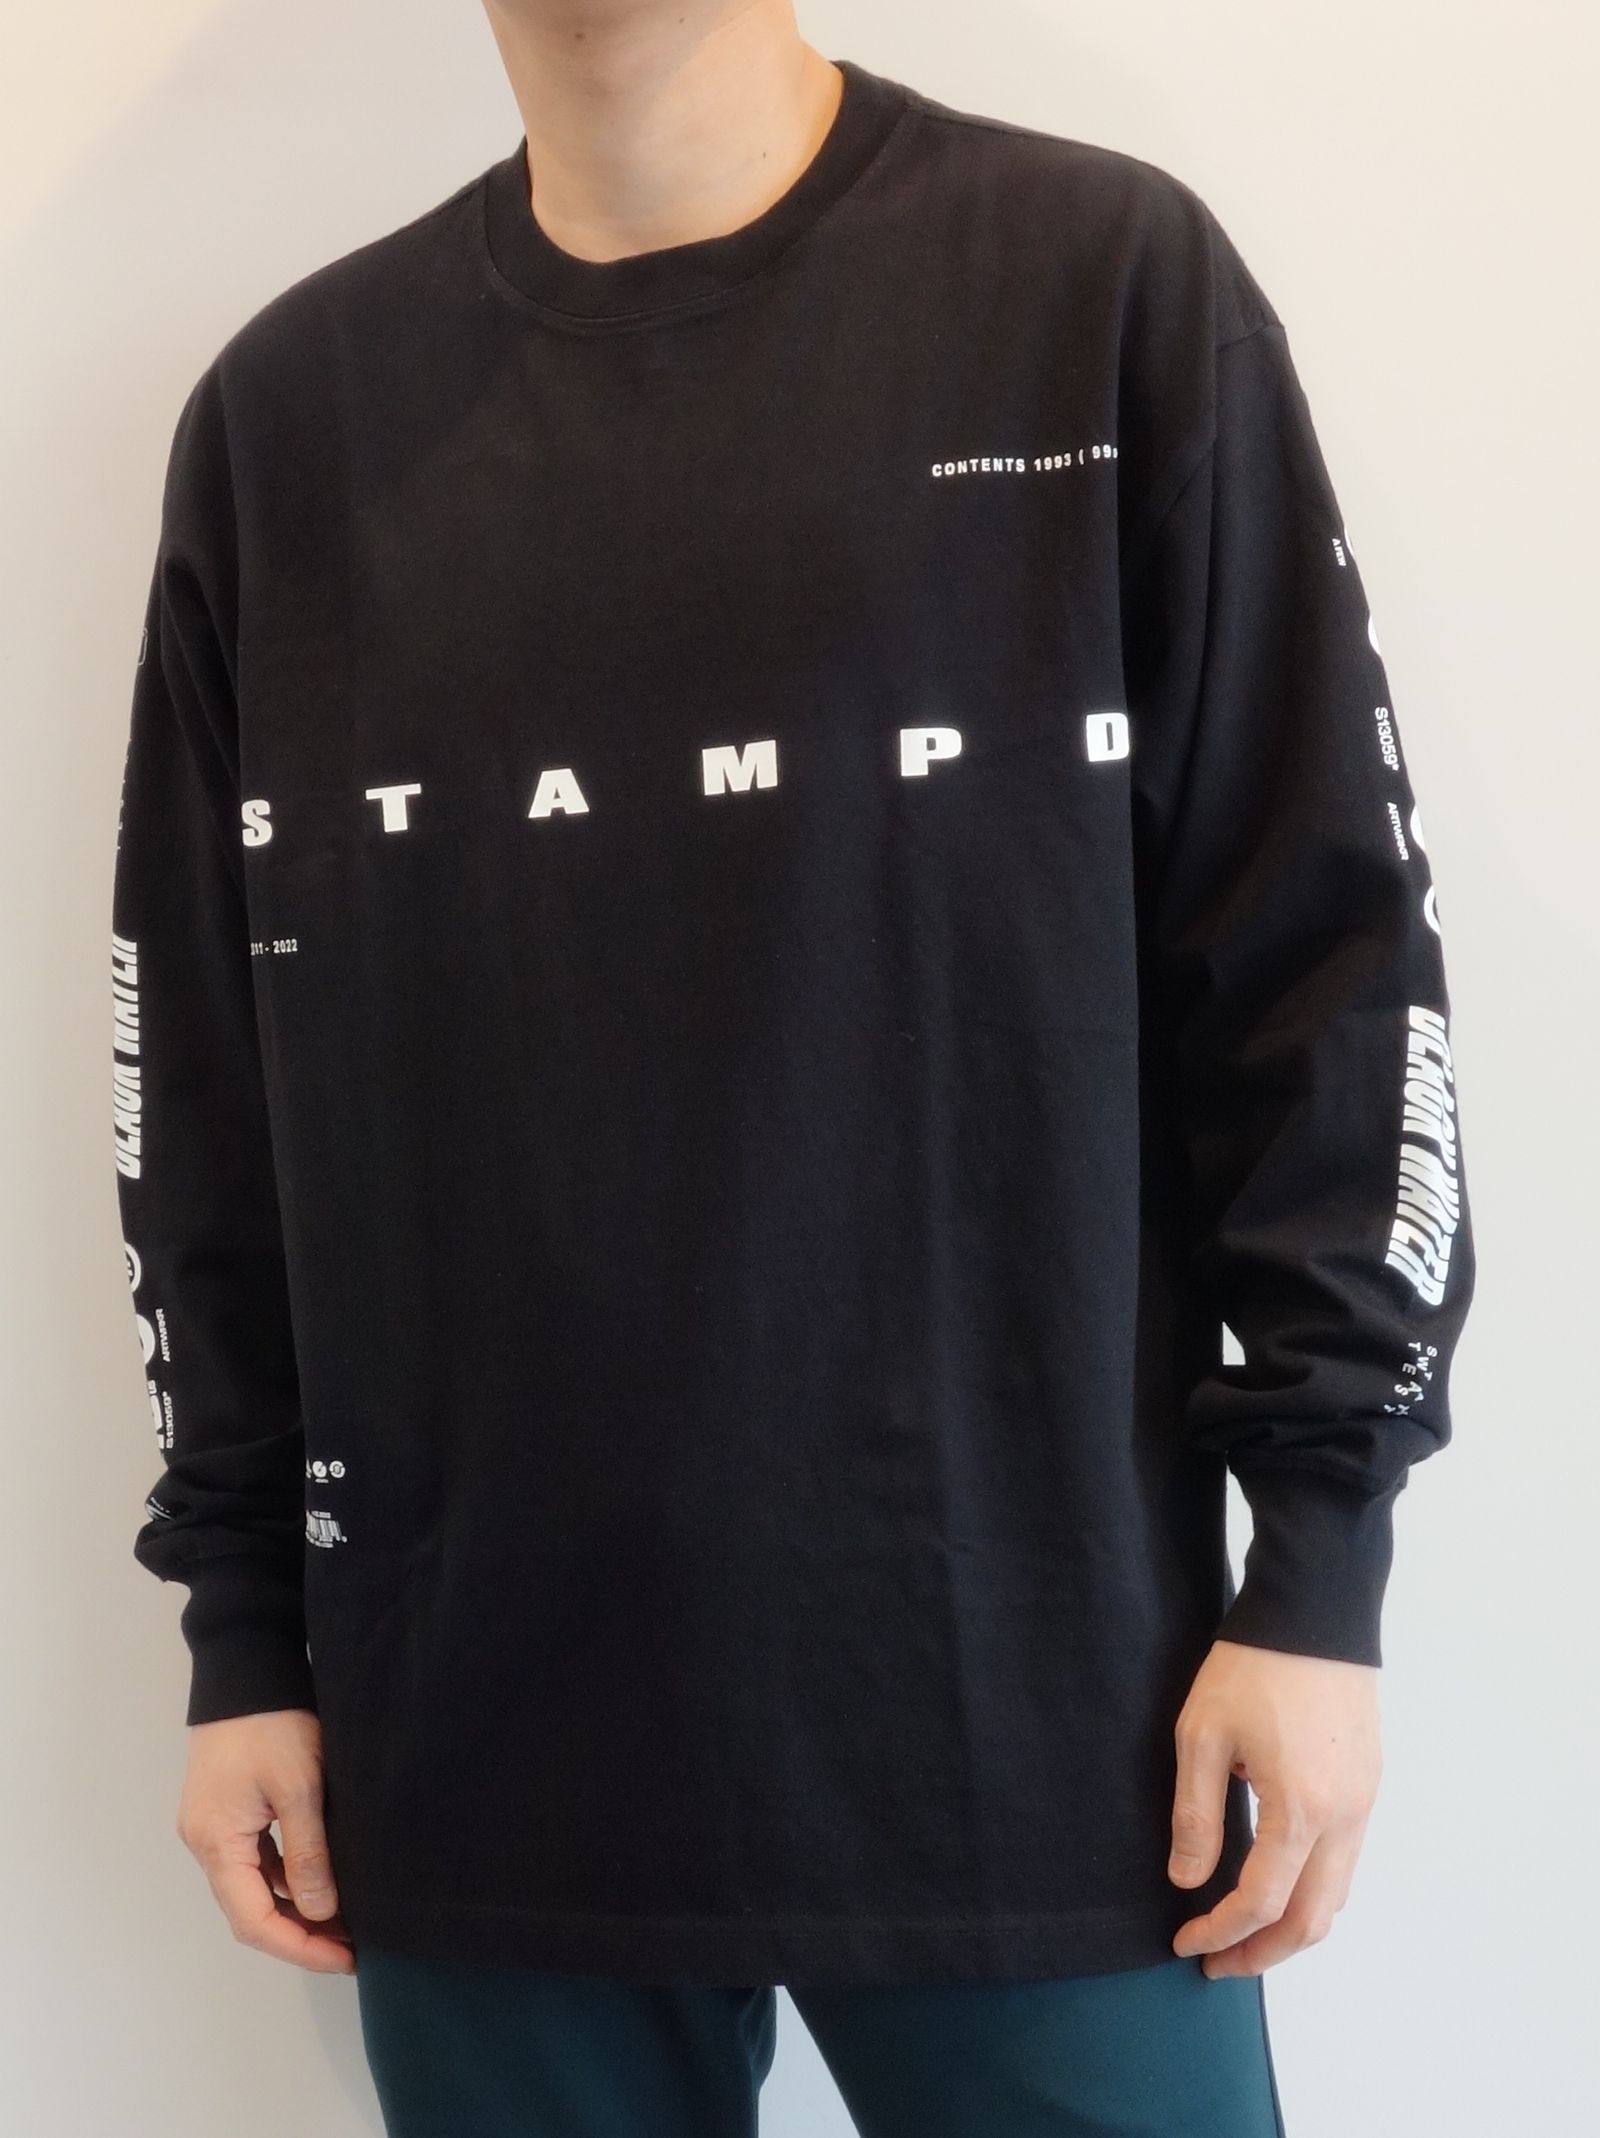 STAMPD - LS BLACK WATER RELAXED TEE / SLA-M2859LT /ビッグロンTEE 